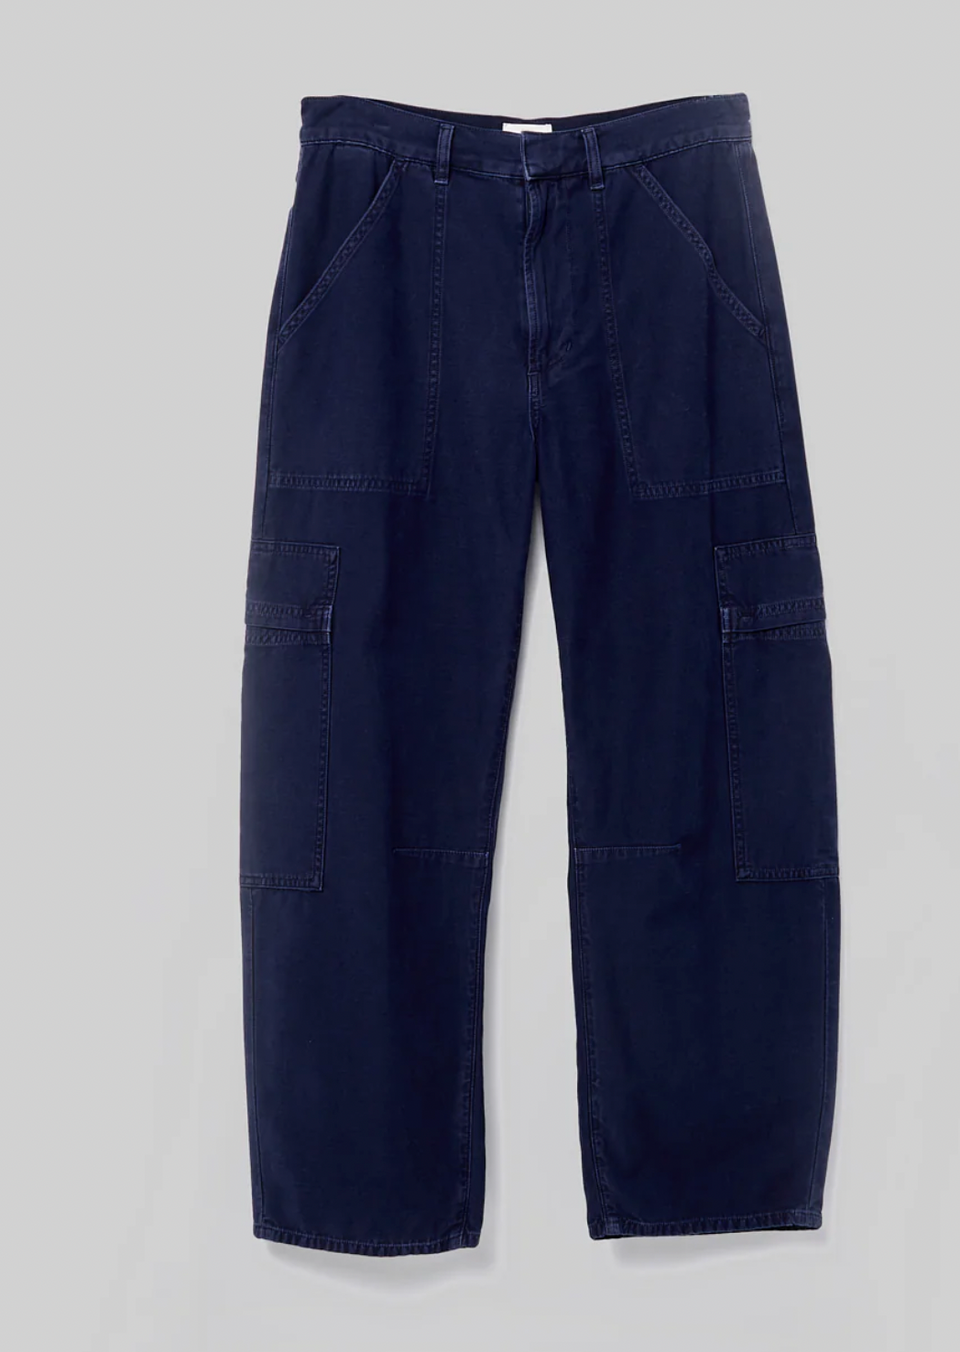 The Marcelle Low Slung Cargo Pant in Navy 